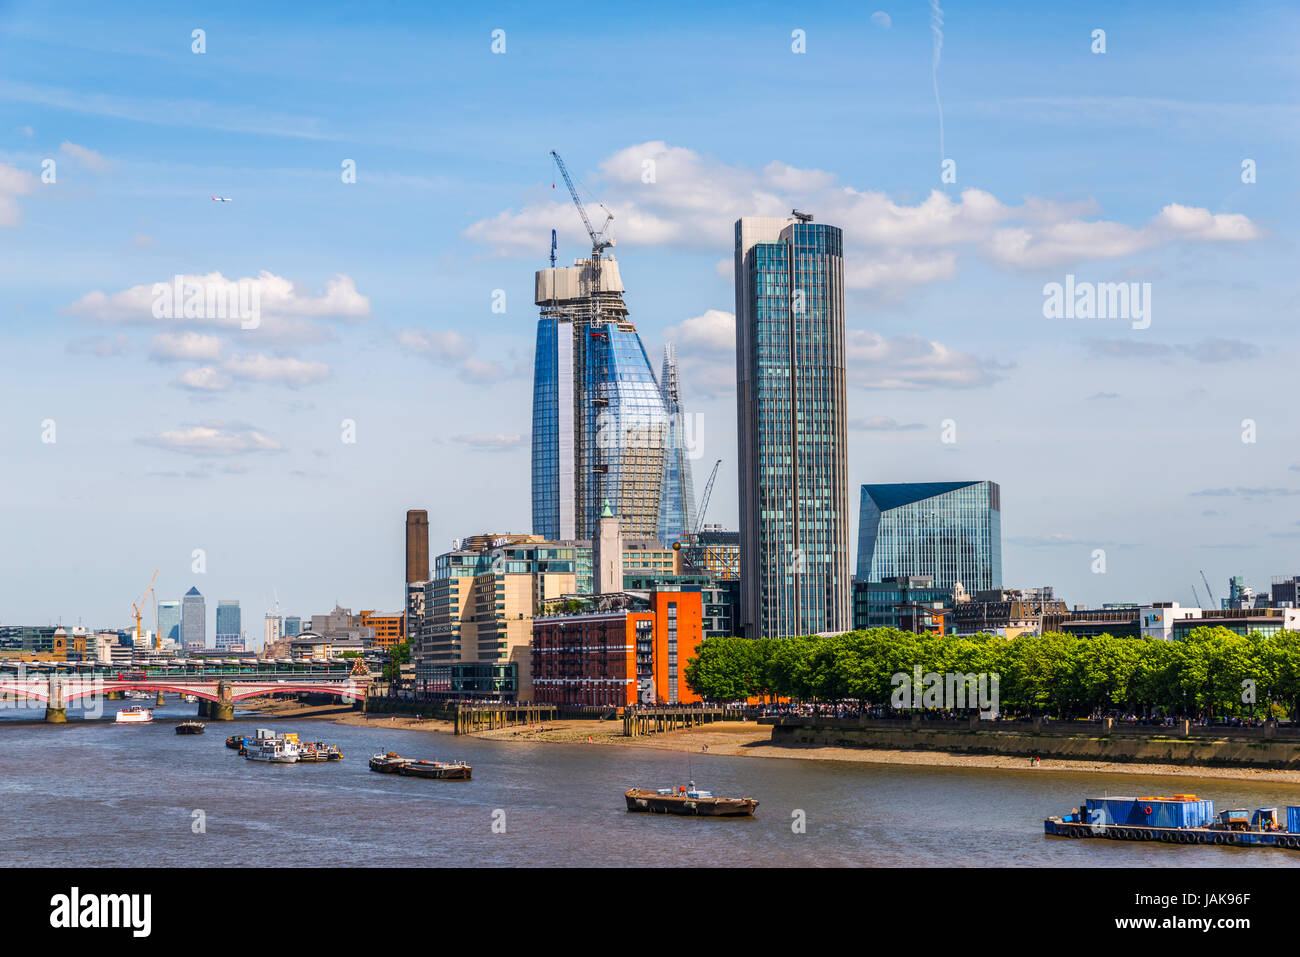 Panoramic city of london, ships on the river thames, modern and old buildings, sunny day Stock Photo